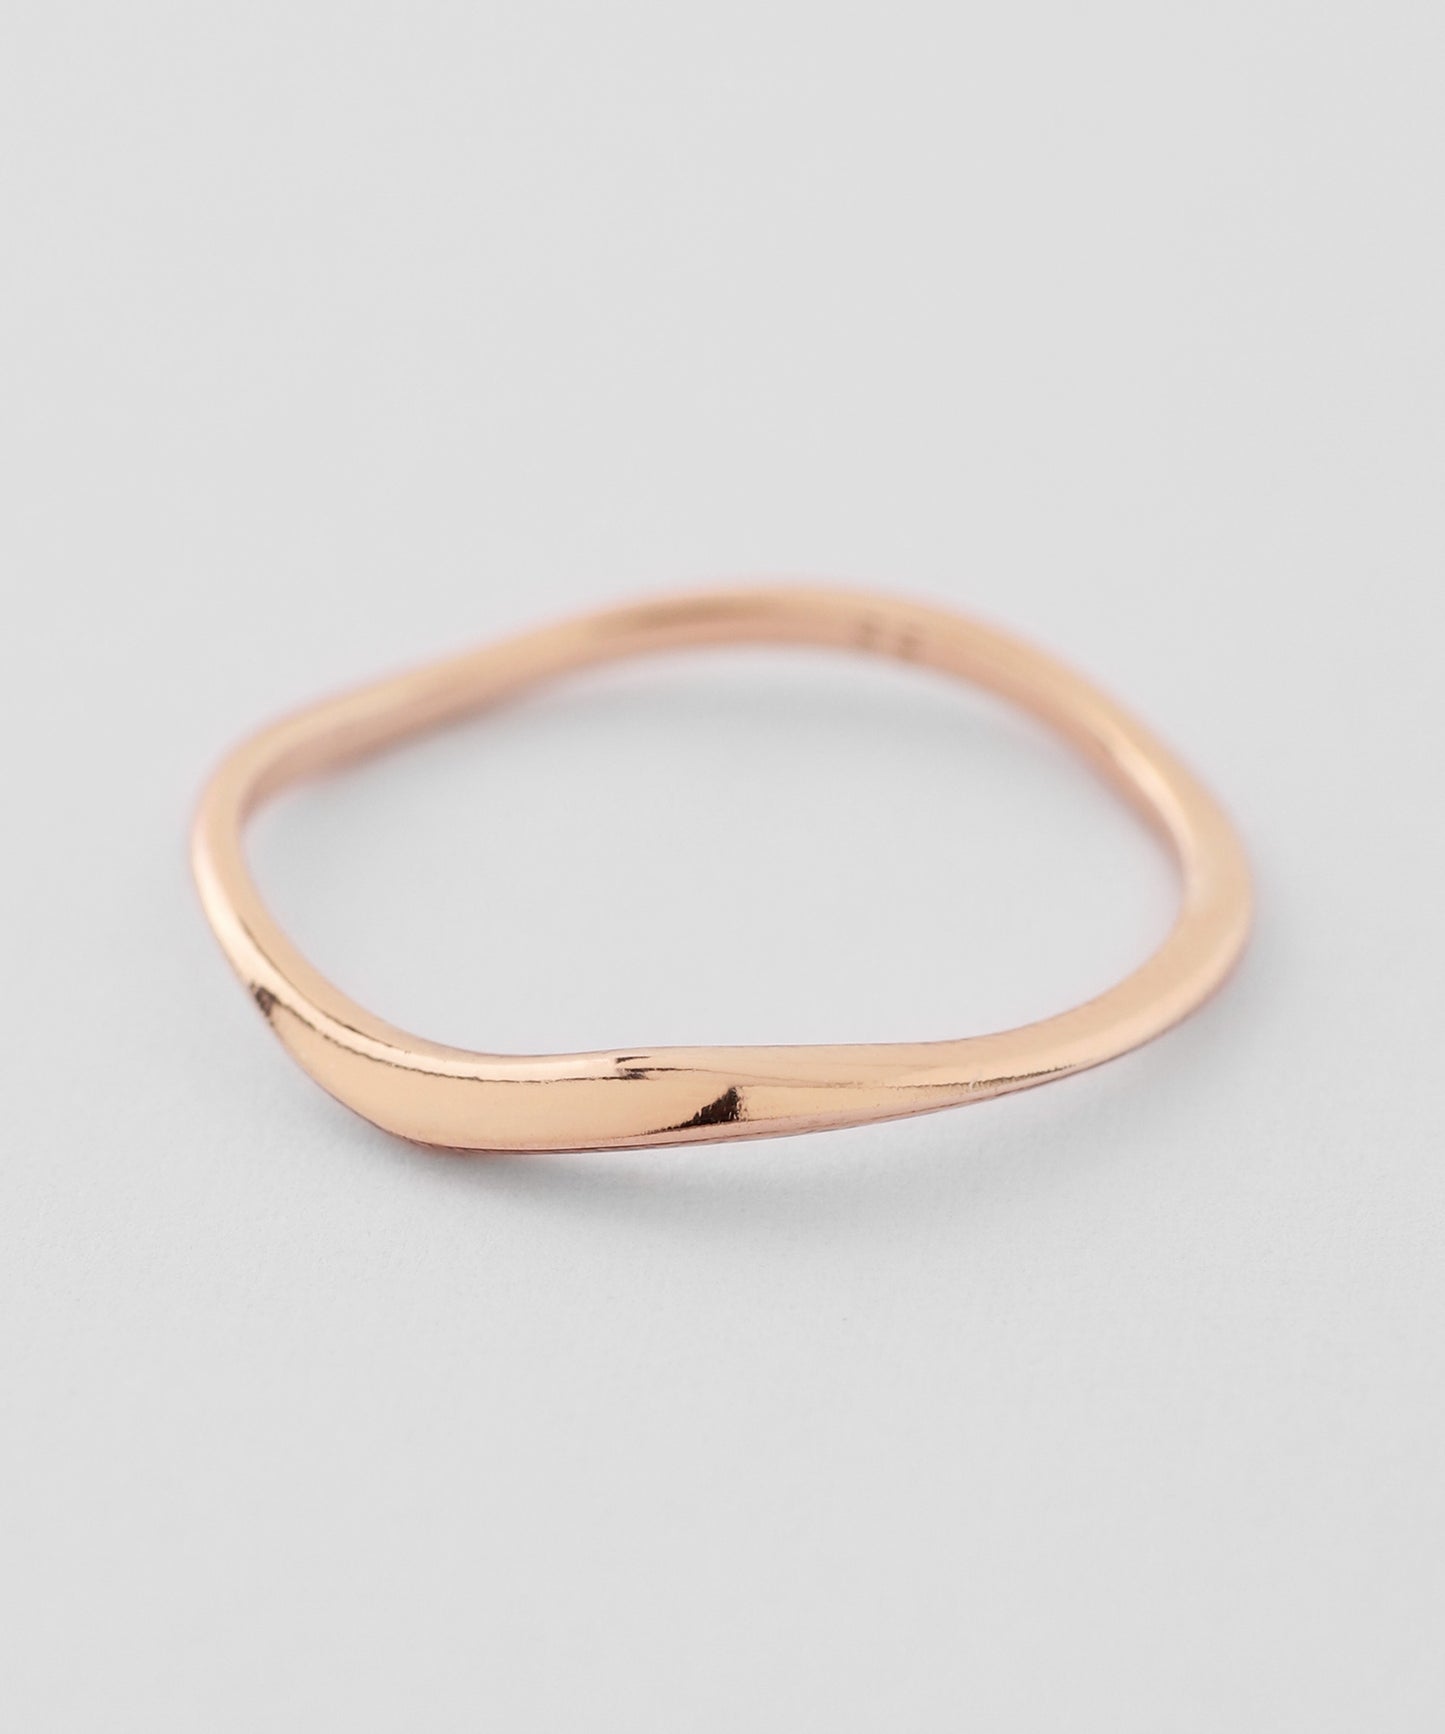 【Limited Quantity】【Online Store Limited】Nuance Ring [Sheer Pink Nudie]